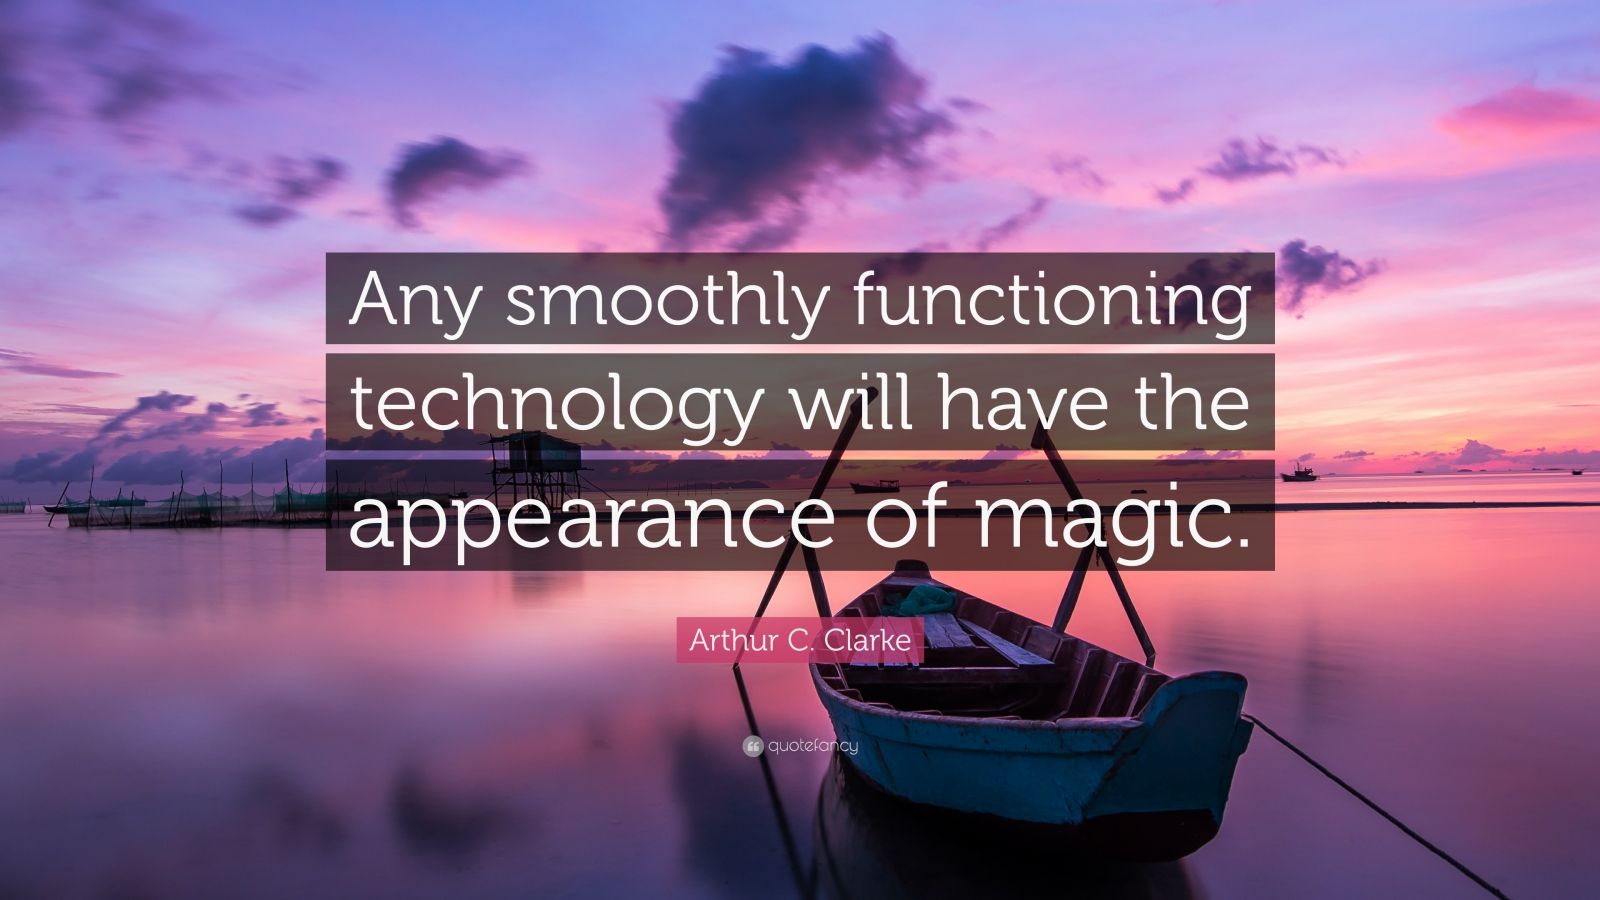 Arthur C. Clarke Quote: “Any smoothly functioning technology will have ...